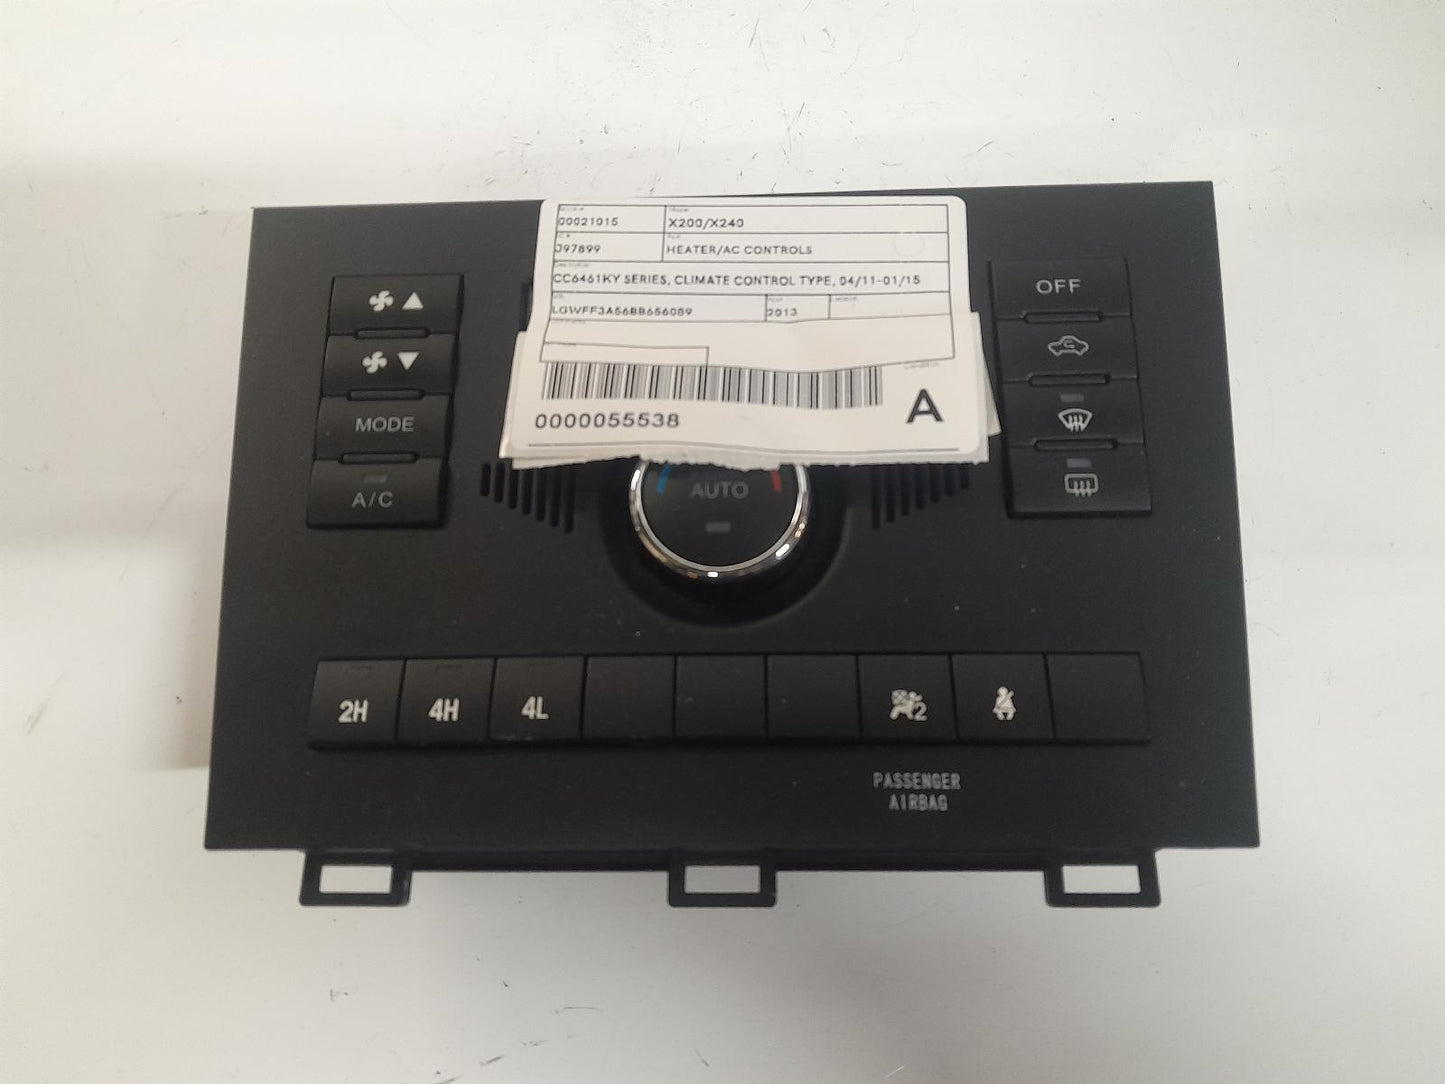 GREAT WALL X200/X240 HEATER/AC CONTROLS CC6461KY SERIES, CLIMATE CONTROL TYPE, 04/11-01/15